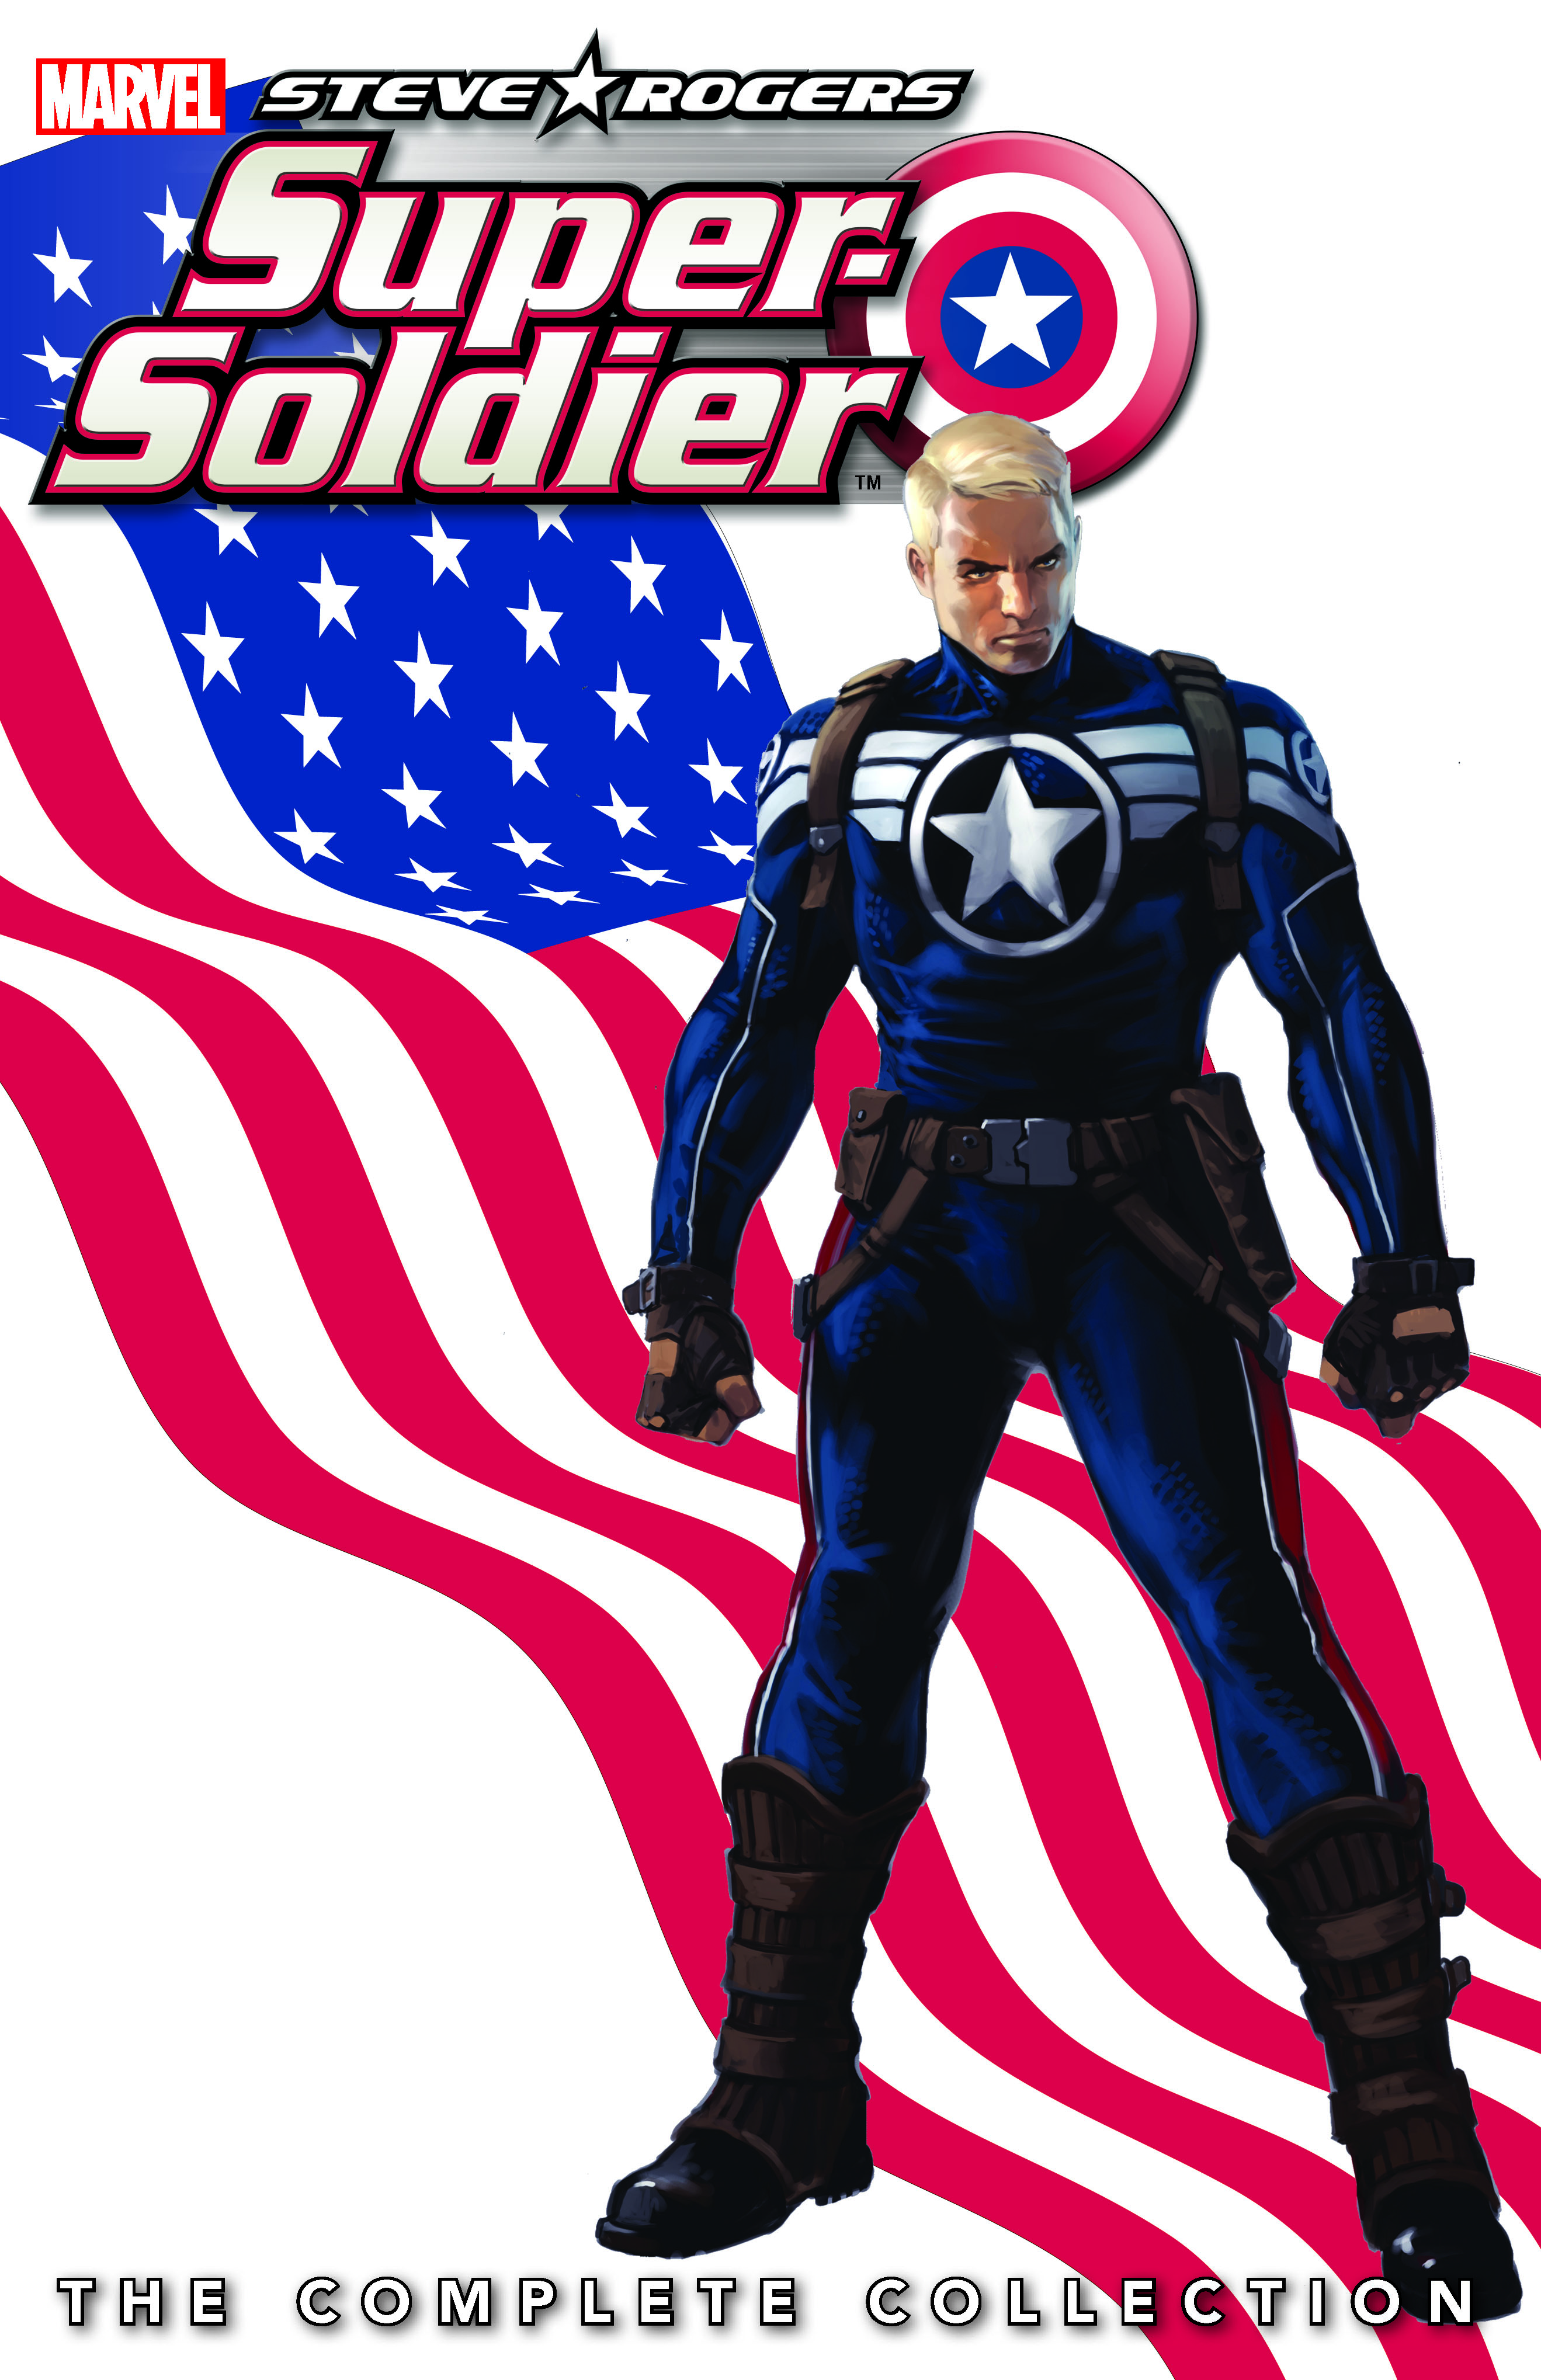 STEVE ROGERS: SUPER-SOLDIER - THE COMPLETE COLLECTION TPB (Trade Paperback)